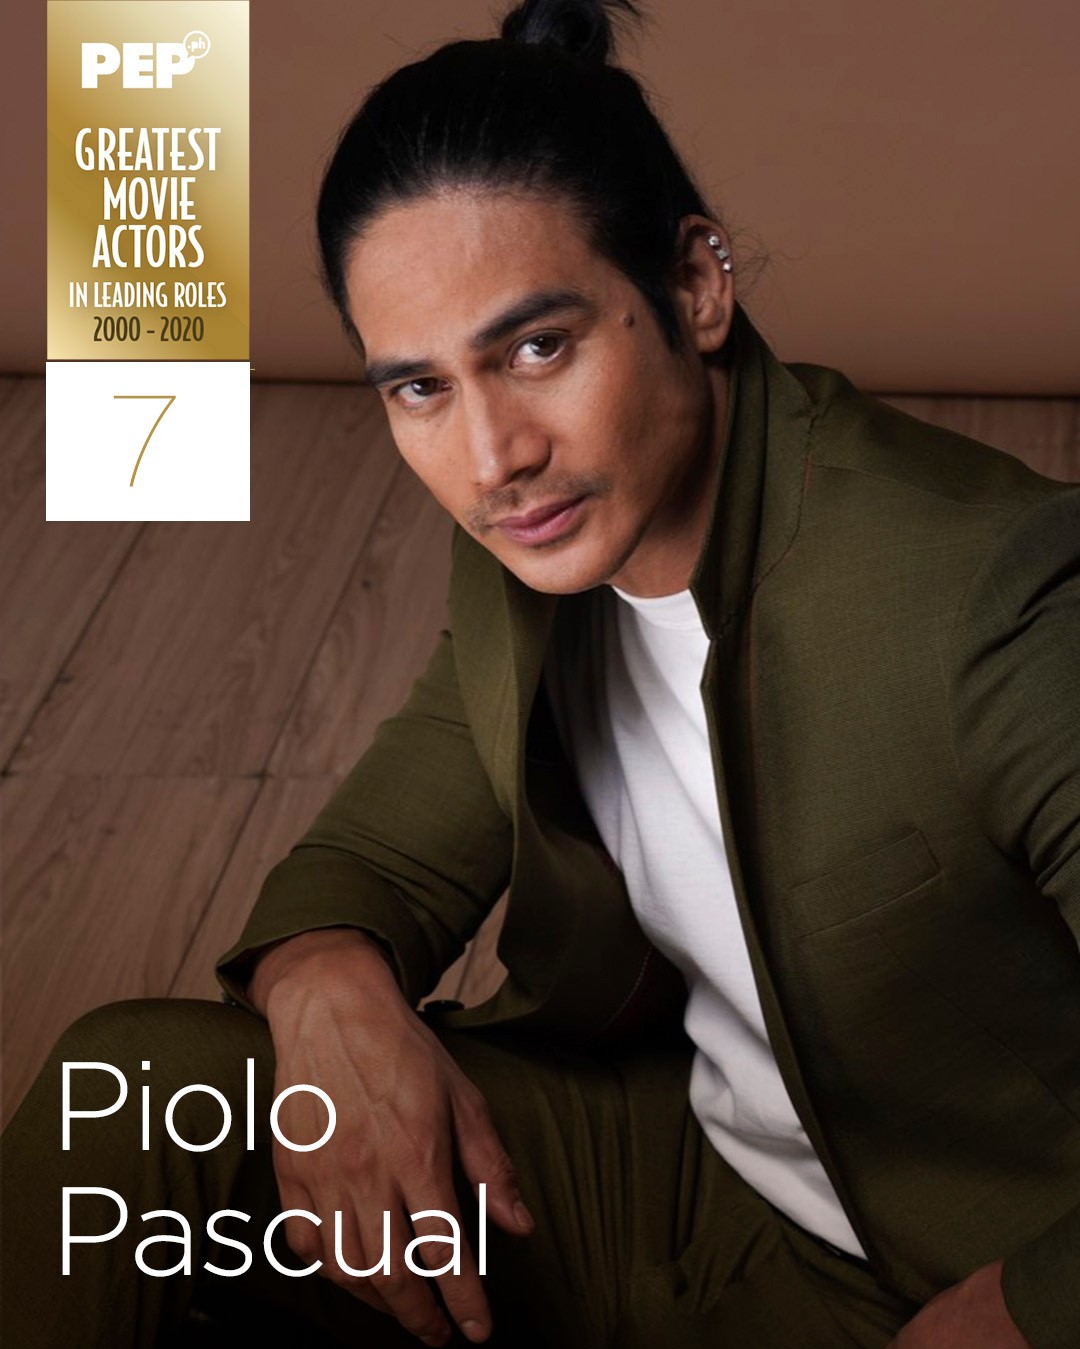 Piolo Pascual, 15 Greatest Movie Actors in Leading Roles